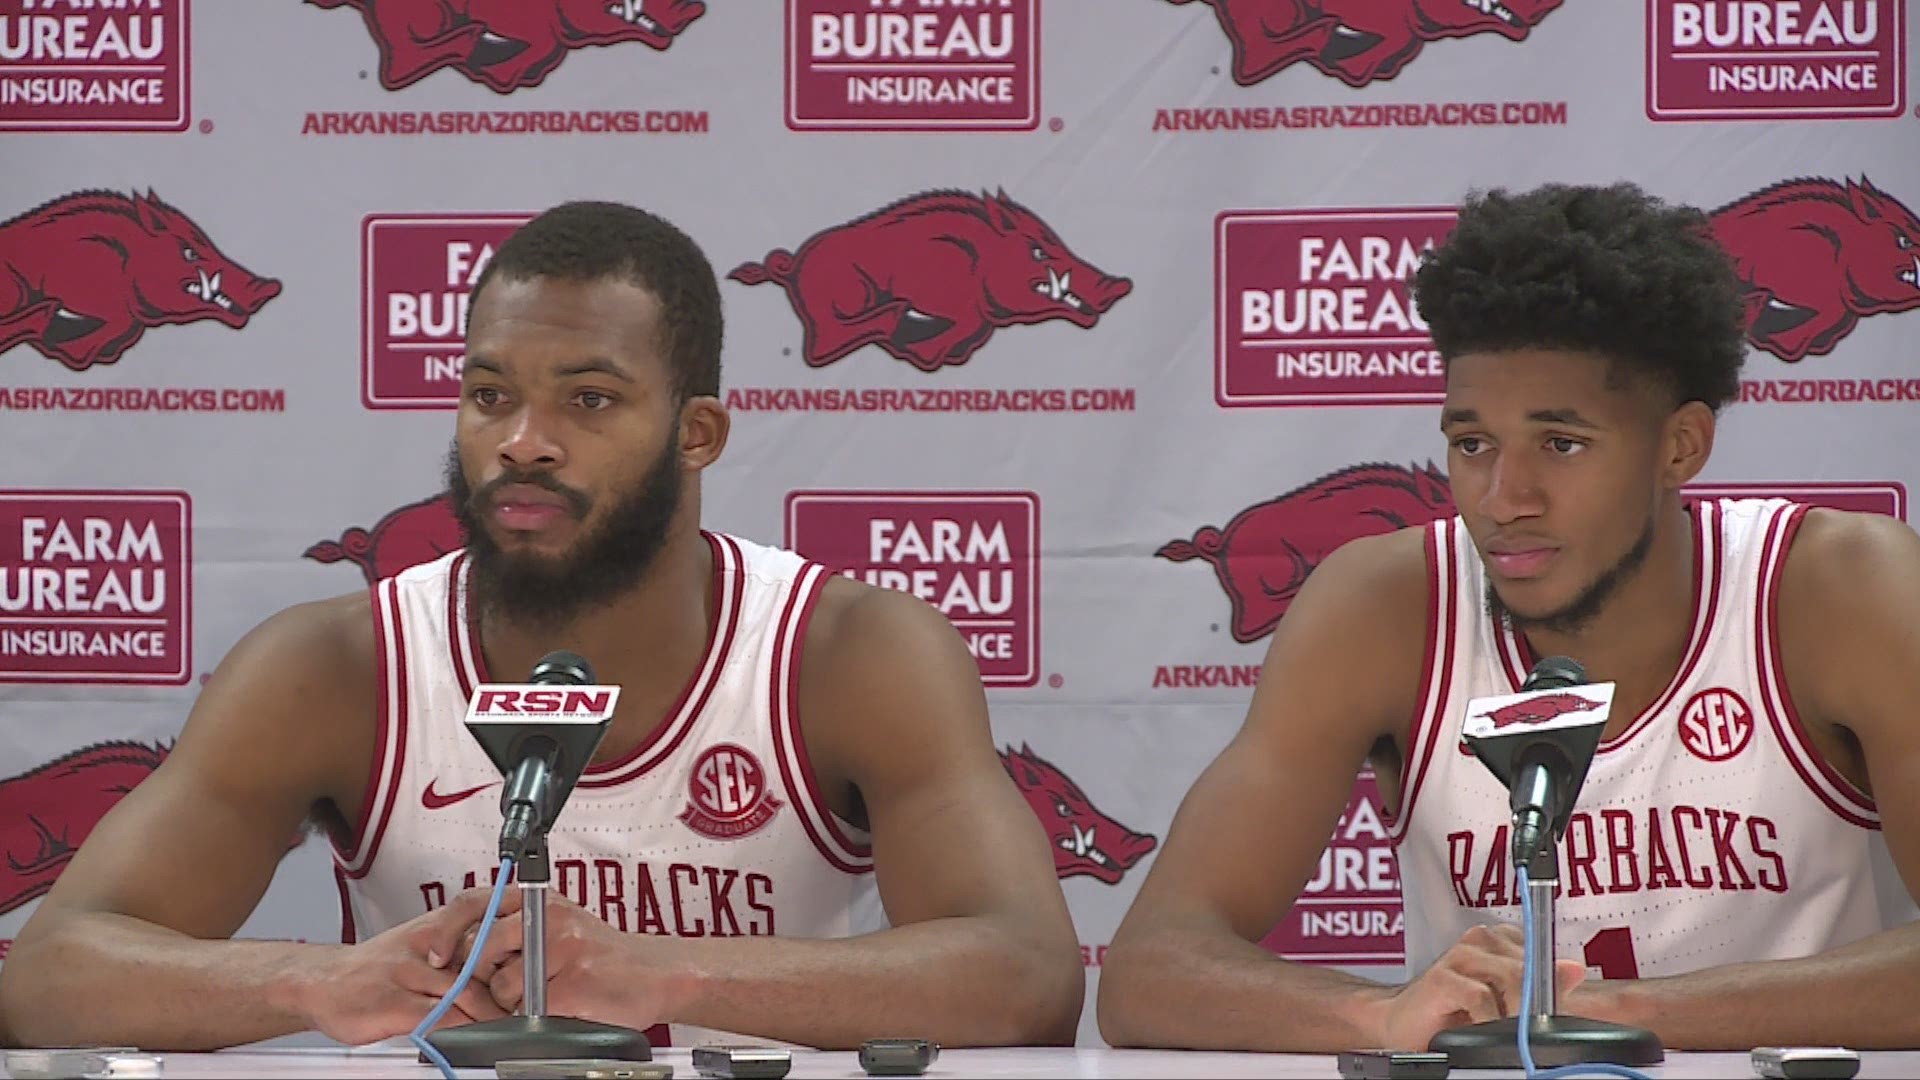 Arkansas led by as many as 26 in the Razorbacks' 79-64 win over Little Rock Sunday